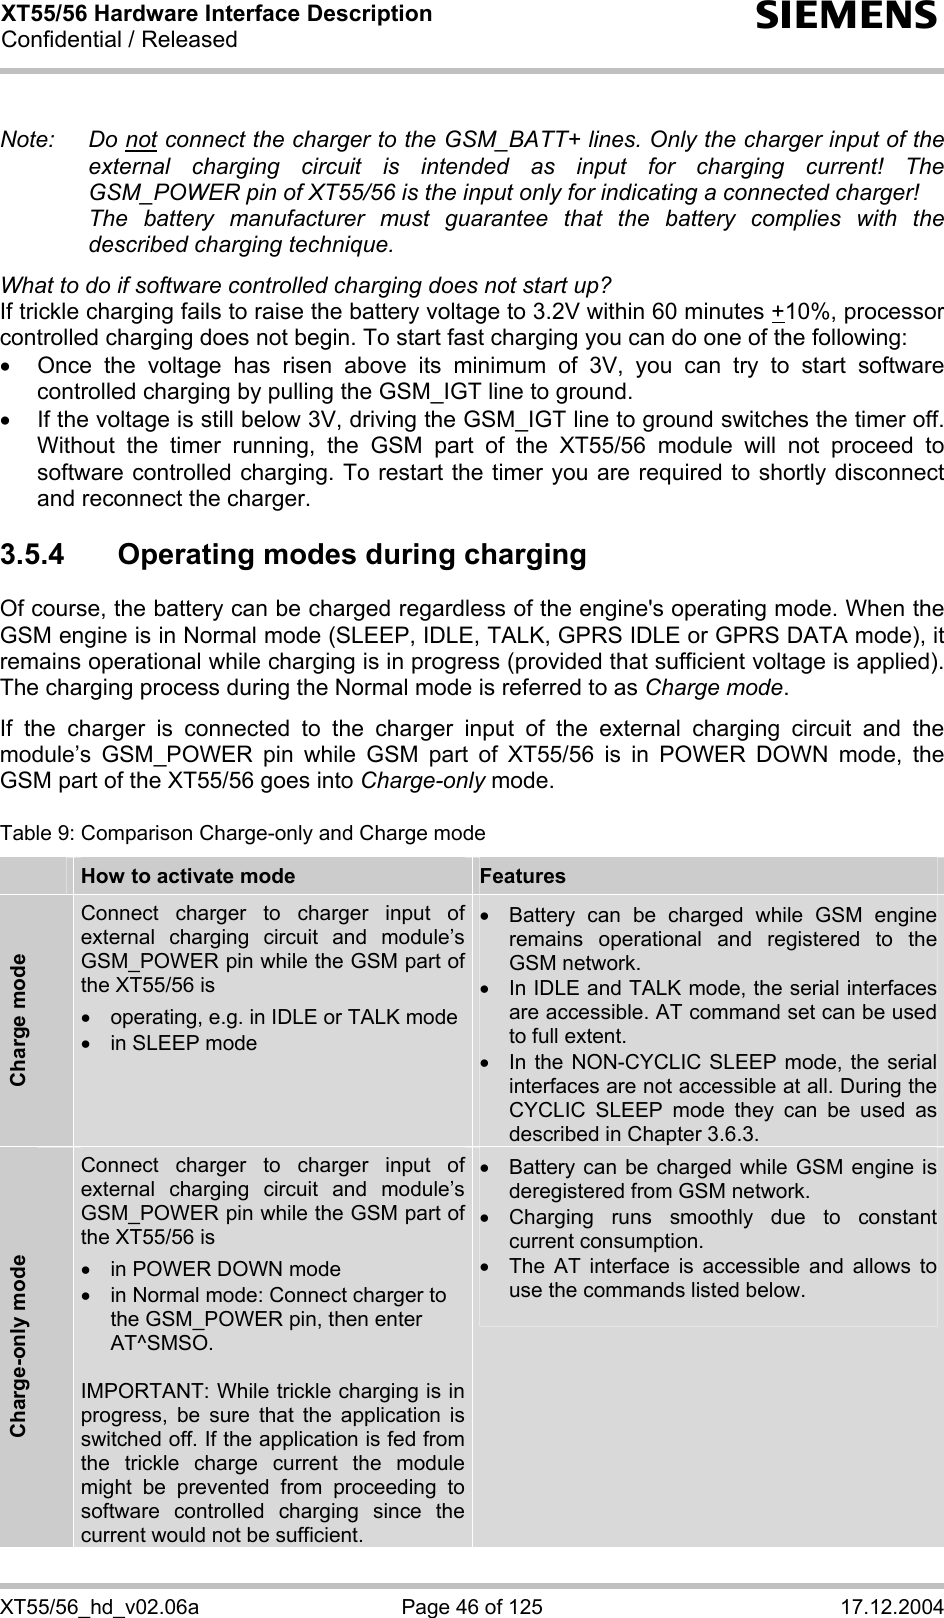 XT55/56 Hardware Interface Description Confidential / Released s XT55/56_hd_v02.06a  Page 46 of 125  17.12.2004  Note: Do not connect the charger to the GSM_BATT+ lines. Only the charger input of the external charging circuit is intended as input for charging current! The GSM_POWER pin of XT55/56 is the input only for indicating a connected charger!   The battery manufacturer must guarantee that the battery complies with the described charging technique.   What to do if software controlled charging does not start up? If trickle charging fails to raise the battery voltage to 3.2V within 60 minutes +10%, processor controlled charging does not begin. To start fast charging you can do one of the following:  •  Once the voltage has risen above its minimum of 3V, you can try to start software controlled charging by pulling the GSM_IGT line to ground.  •  If the voltage is still below 3V, driving the GSM_IGT line to ground switches the timer off. Without the timer running, the GSM part of the XT55/56 module will not proceed to software controlled charging. To restart the timer you are required to shortly disconnect and reconnect the charger. 3.5.4  Operating modes during charging Of course, the battery can be charged regardless of the engine&apos;s operating mode. When the GSM engine is in Normal mode (SLEEP, IDLE, TALK, GPRS IDLE or GPRS DATA mode), it remains operational while charging is in progress (provided that sufficient voltage is applied). The charging process during the Normal mode is referred to as Charge mode.   If the charger is connected to the charger input of the external charging circuit and the module’s GSM_POWER pin while GSM part of XT55/56 is in POWER DOWN mode, the GSM part of the XT55/56 goes into Charge-only mode.   Table 9: Comparison Charge-only and Charge mode  How to activate mode  Features Charge mode Connect charger to charger input of external charging circuit and module’s GSM_POWER pin while the GSM part of the XT55/56 is •  operating, e.g. in IDLE or TALK mode •  in SLEEP mode •  Battery can be charged while GSM engine remains operational and registered to the GSM network. •  In IDLE and TALK mode, the serial interfaces are accessible. AT command set can be used to full extent. •  In the NON-CYCLIC SLEEP mode, the serial interfaces are not accessible at all. During the CYCLIC SLEEP mode they can be used as described in Chapter 3.6.3. Charge-only mode Connect charger to charger input of external charging circuit and module’s GSM_POWER pin while the GSM part of the XT55/56 is •  in POWER DOWN mode •  in Normal mode: Connect charger to the GSM_POWER pin, then enter AT^SMSO.  IMPORTANT: While trickle charging is in progress, be sure that the application is switched off. If the application is fed from the trickle charge current the module might be prevented from proceeding to software controlled charging since the current would not be sufficient.  •  Battery can be charged while GSM engine is deregistered from GSM network. • Charging runs smoothly due to constant current consumption. •  The AT interface is accessible and allows to use the commands listed below.   